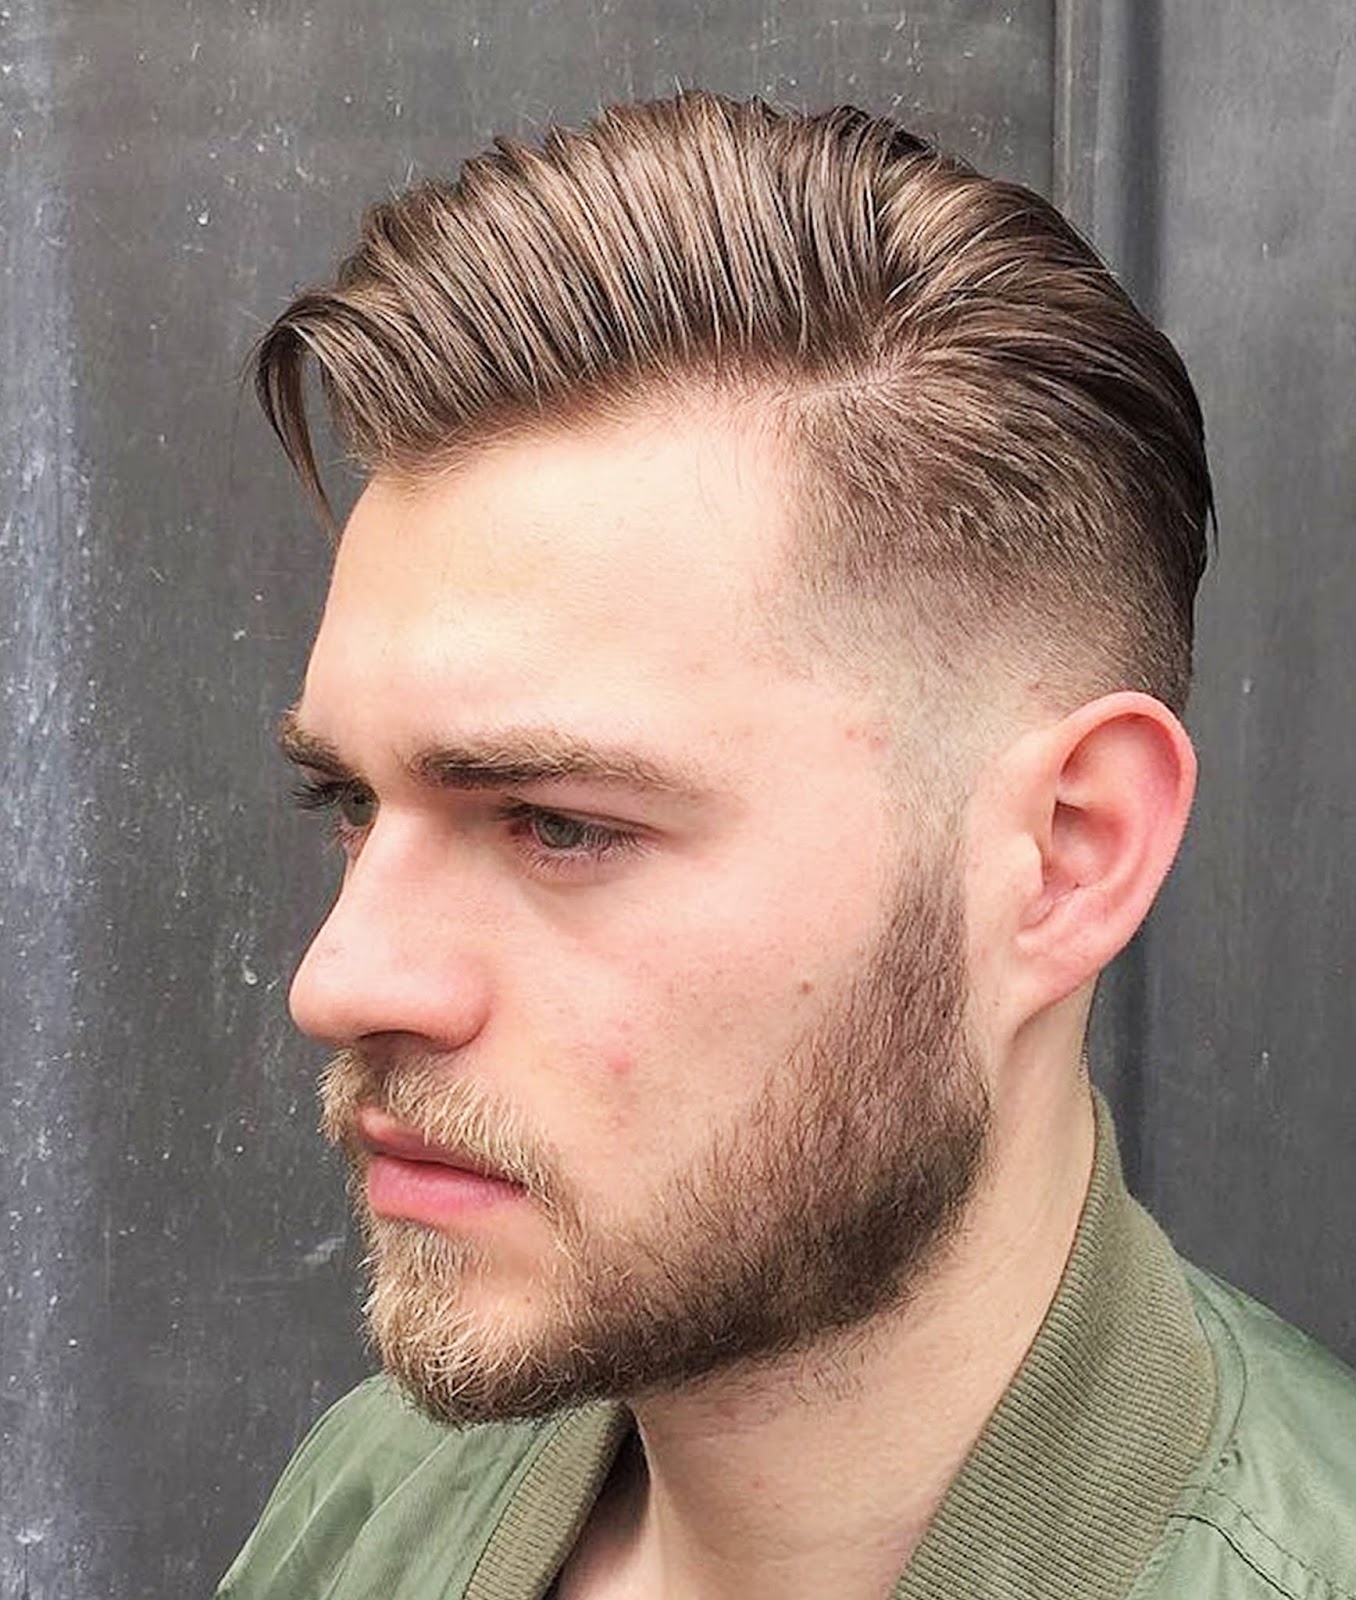 NEW 10 Hairstyles for Men 2022 Hairstyles Spot